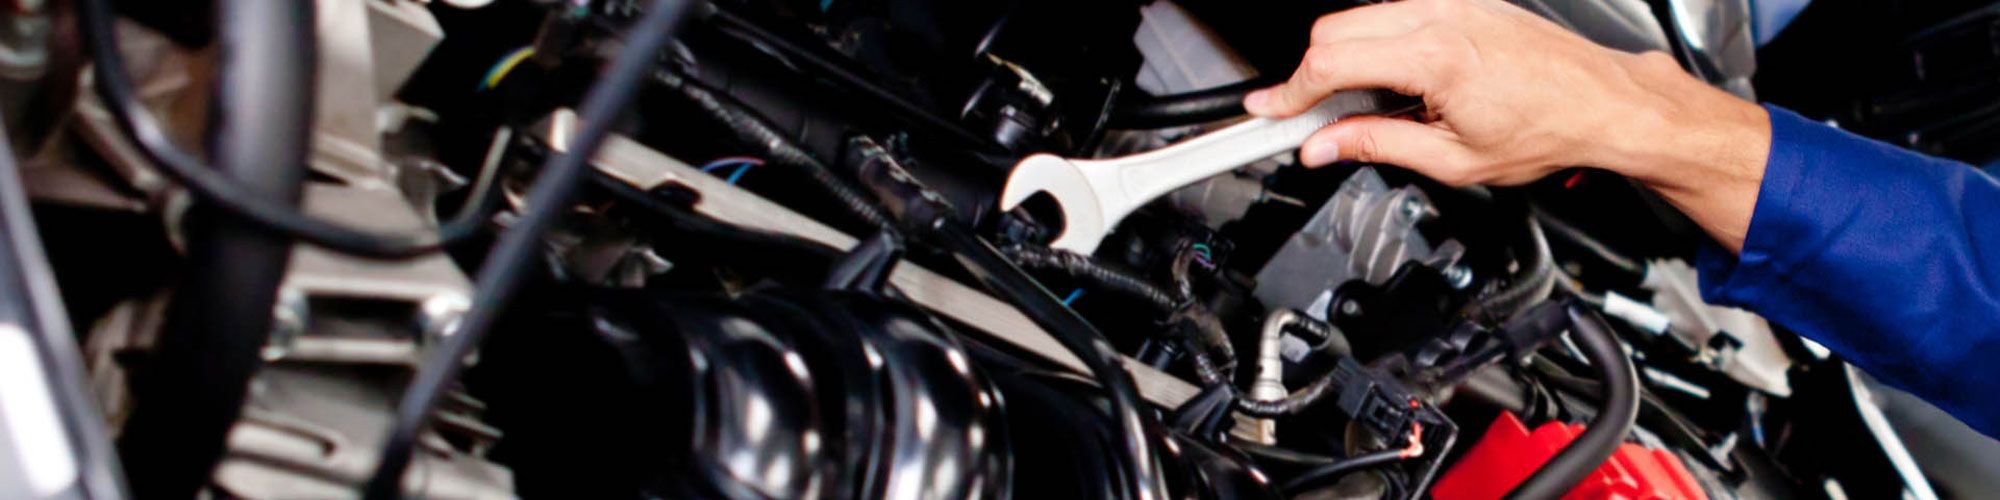 Car Servicing and Parts in Perth & Dundee